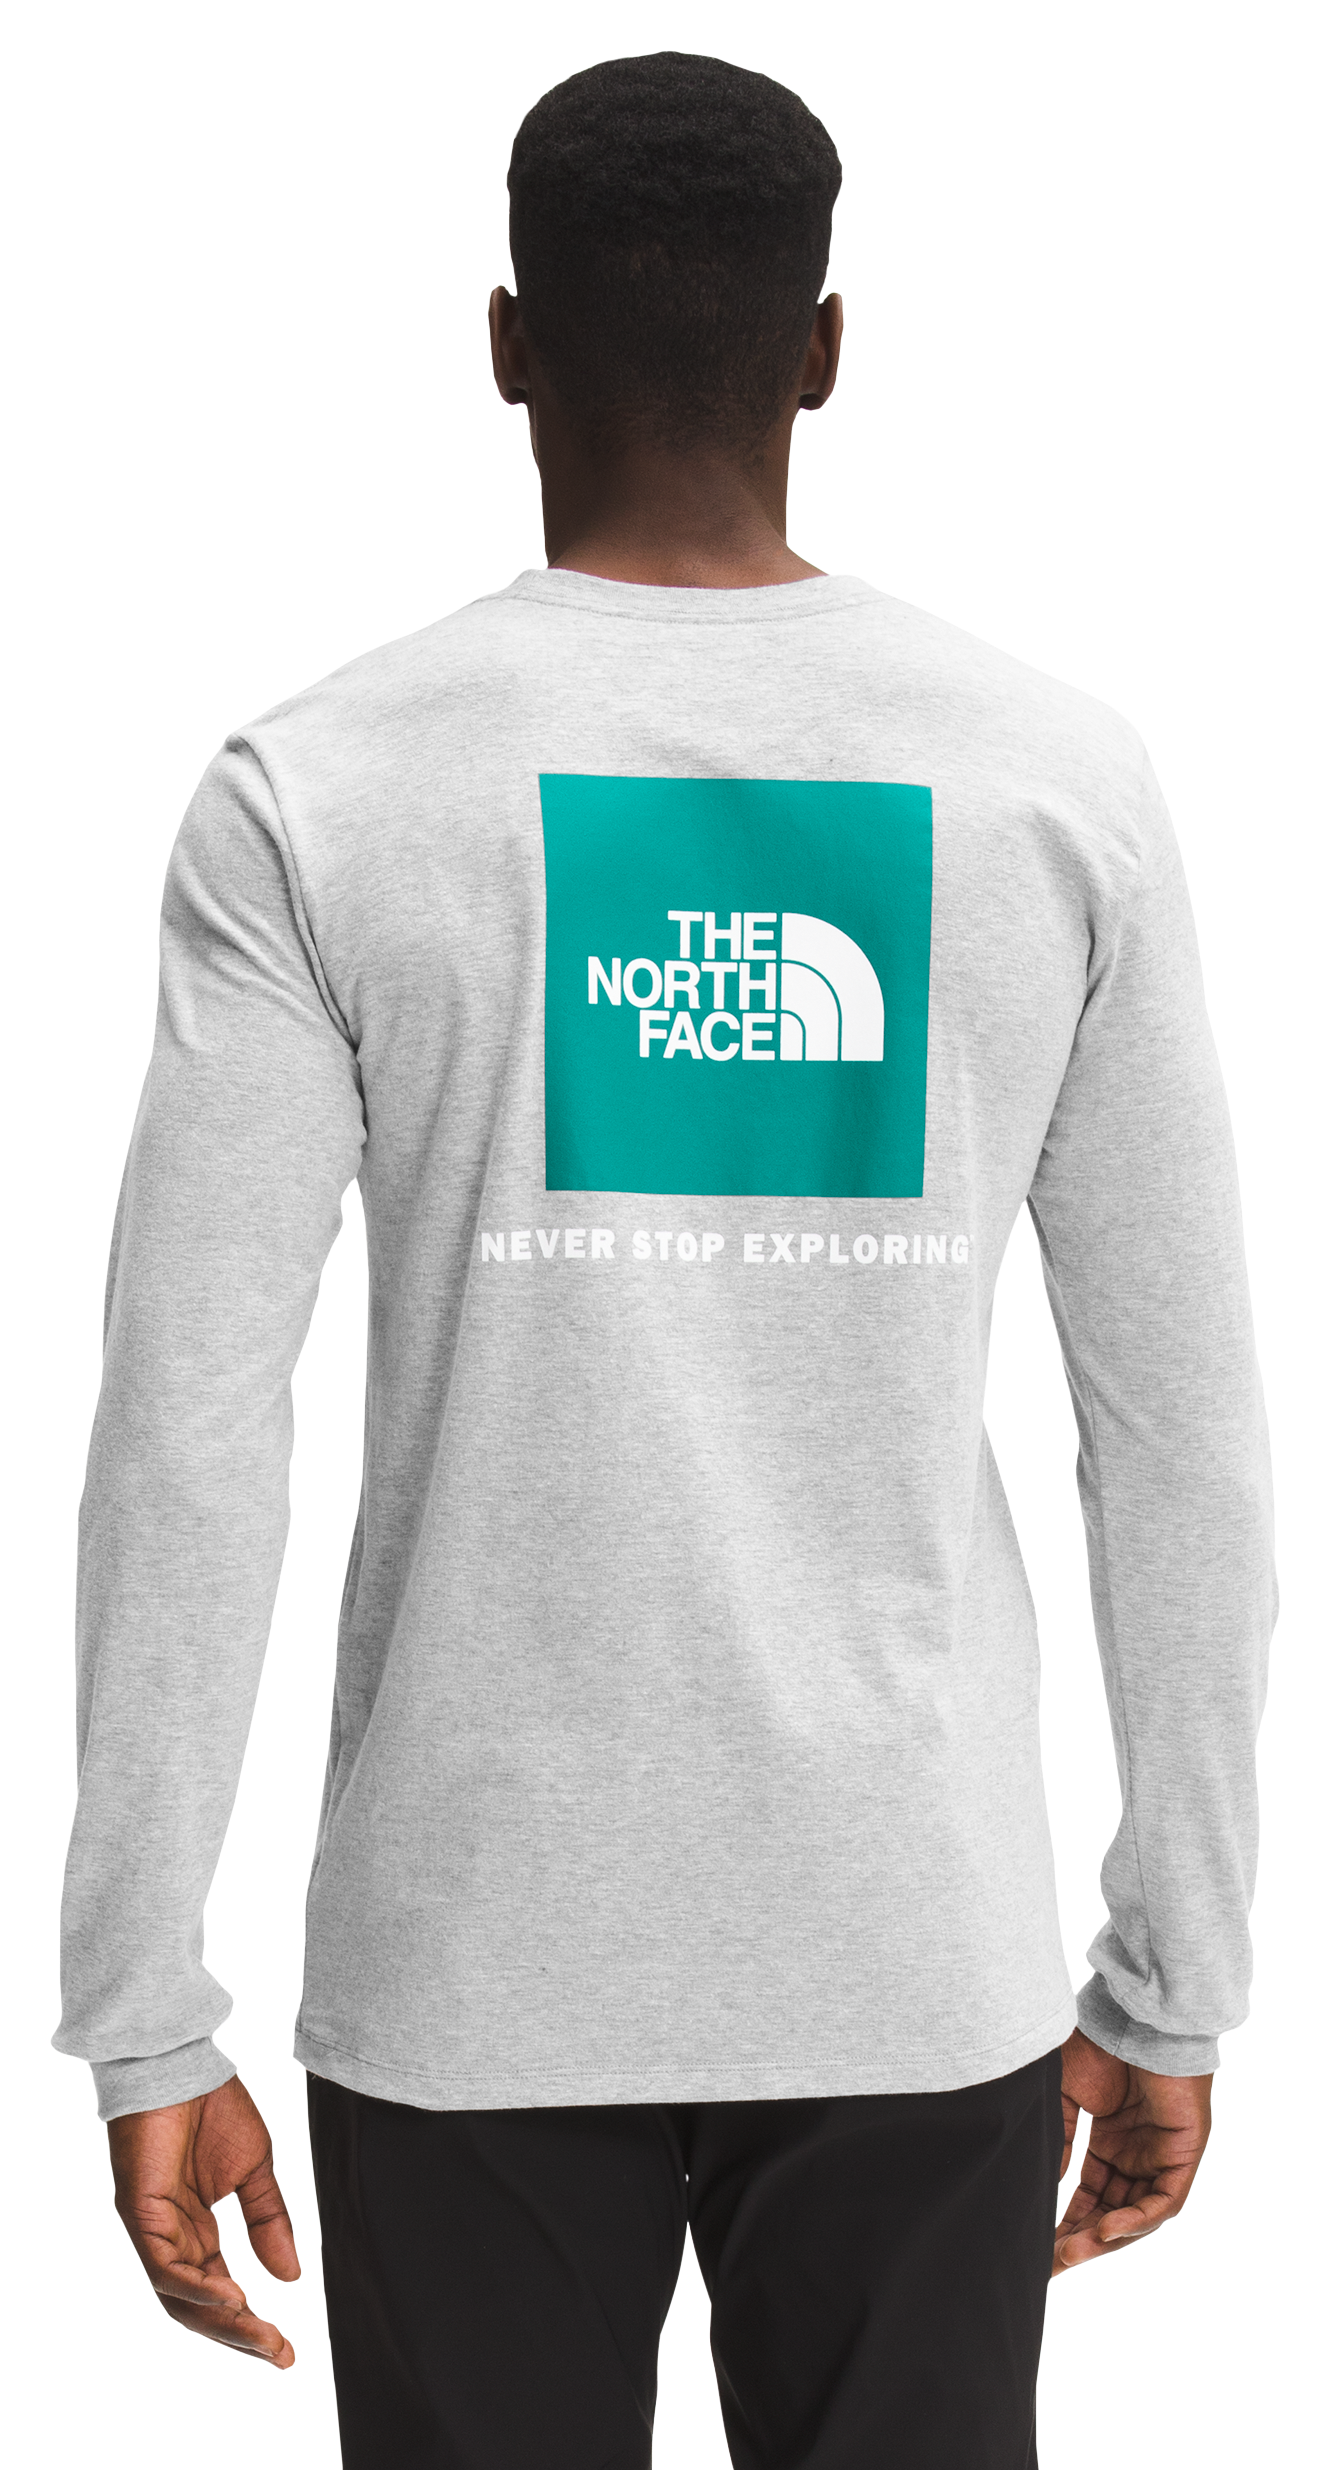 The North Face Box NSE Long-Sleeve Shirt for Men - TNF Light Grey Heather/Porcelain Green - L